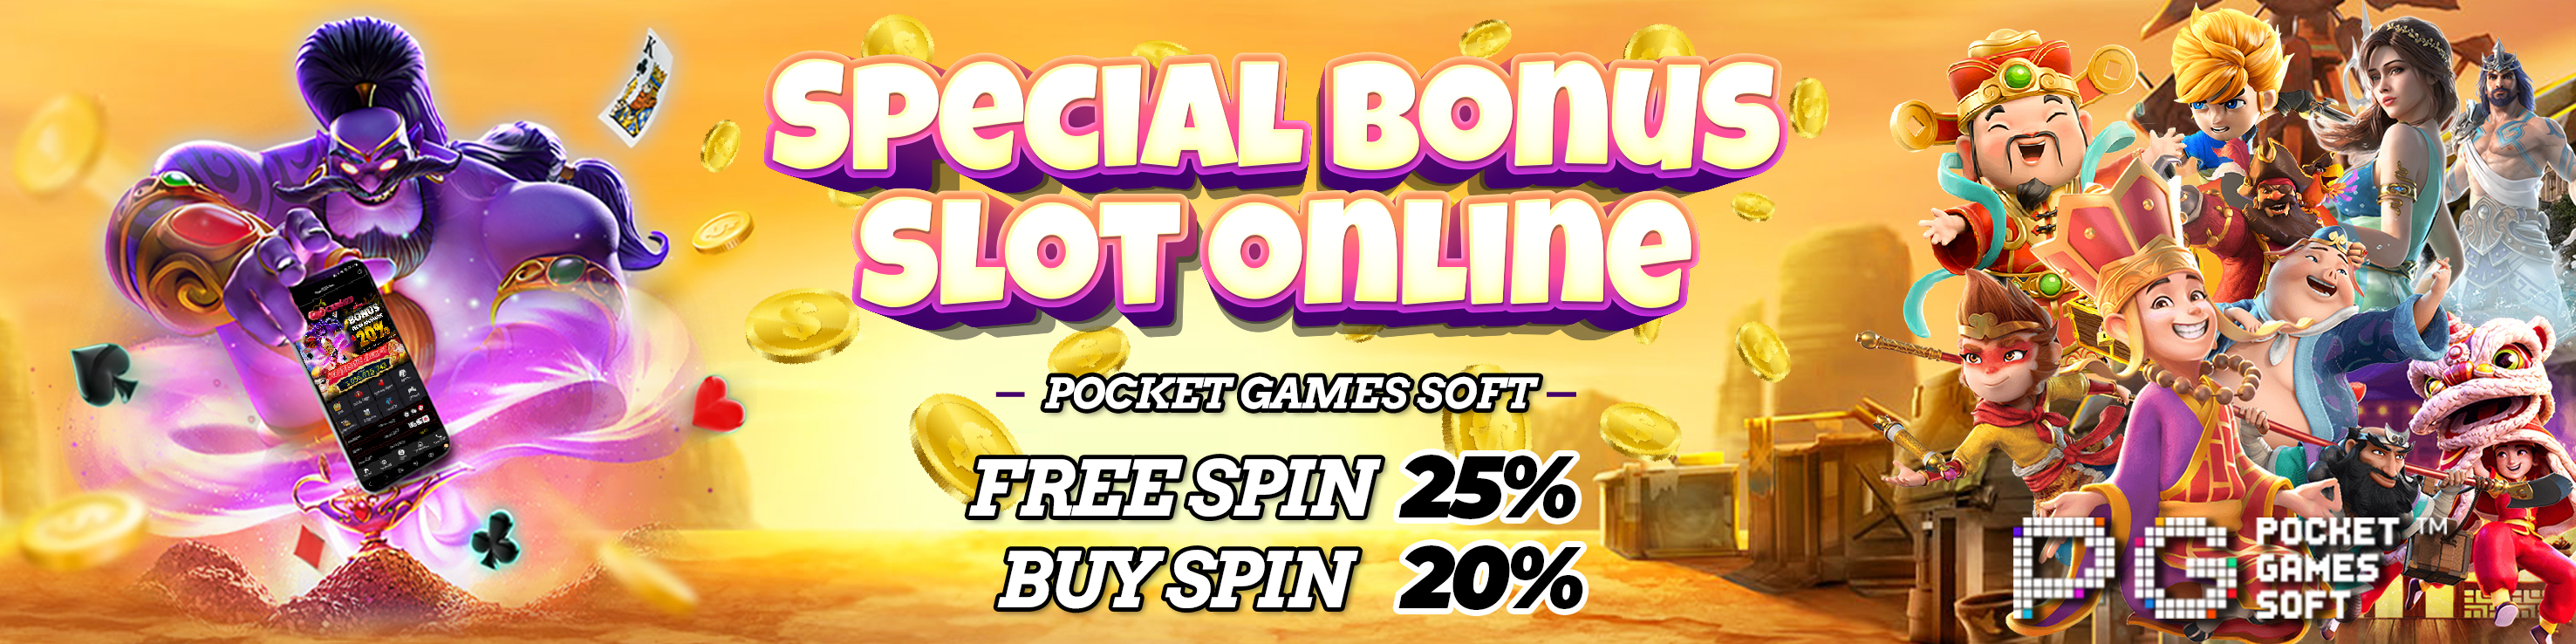 EVENT FREESPIN BUYSPIN PGSOFT